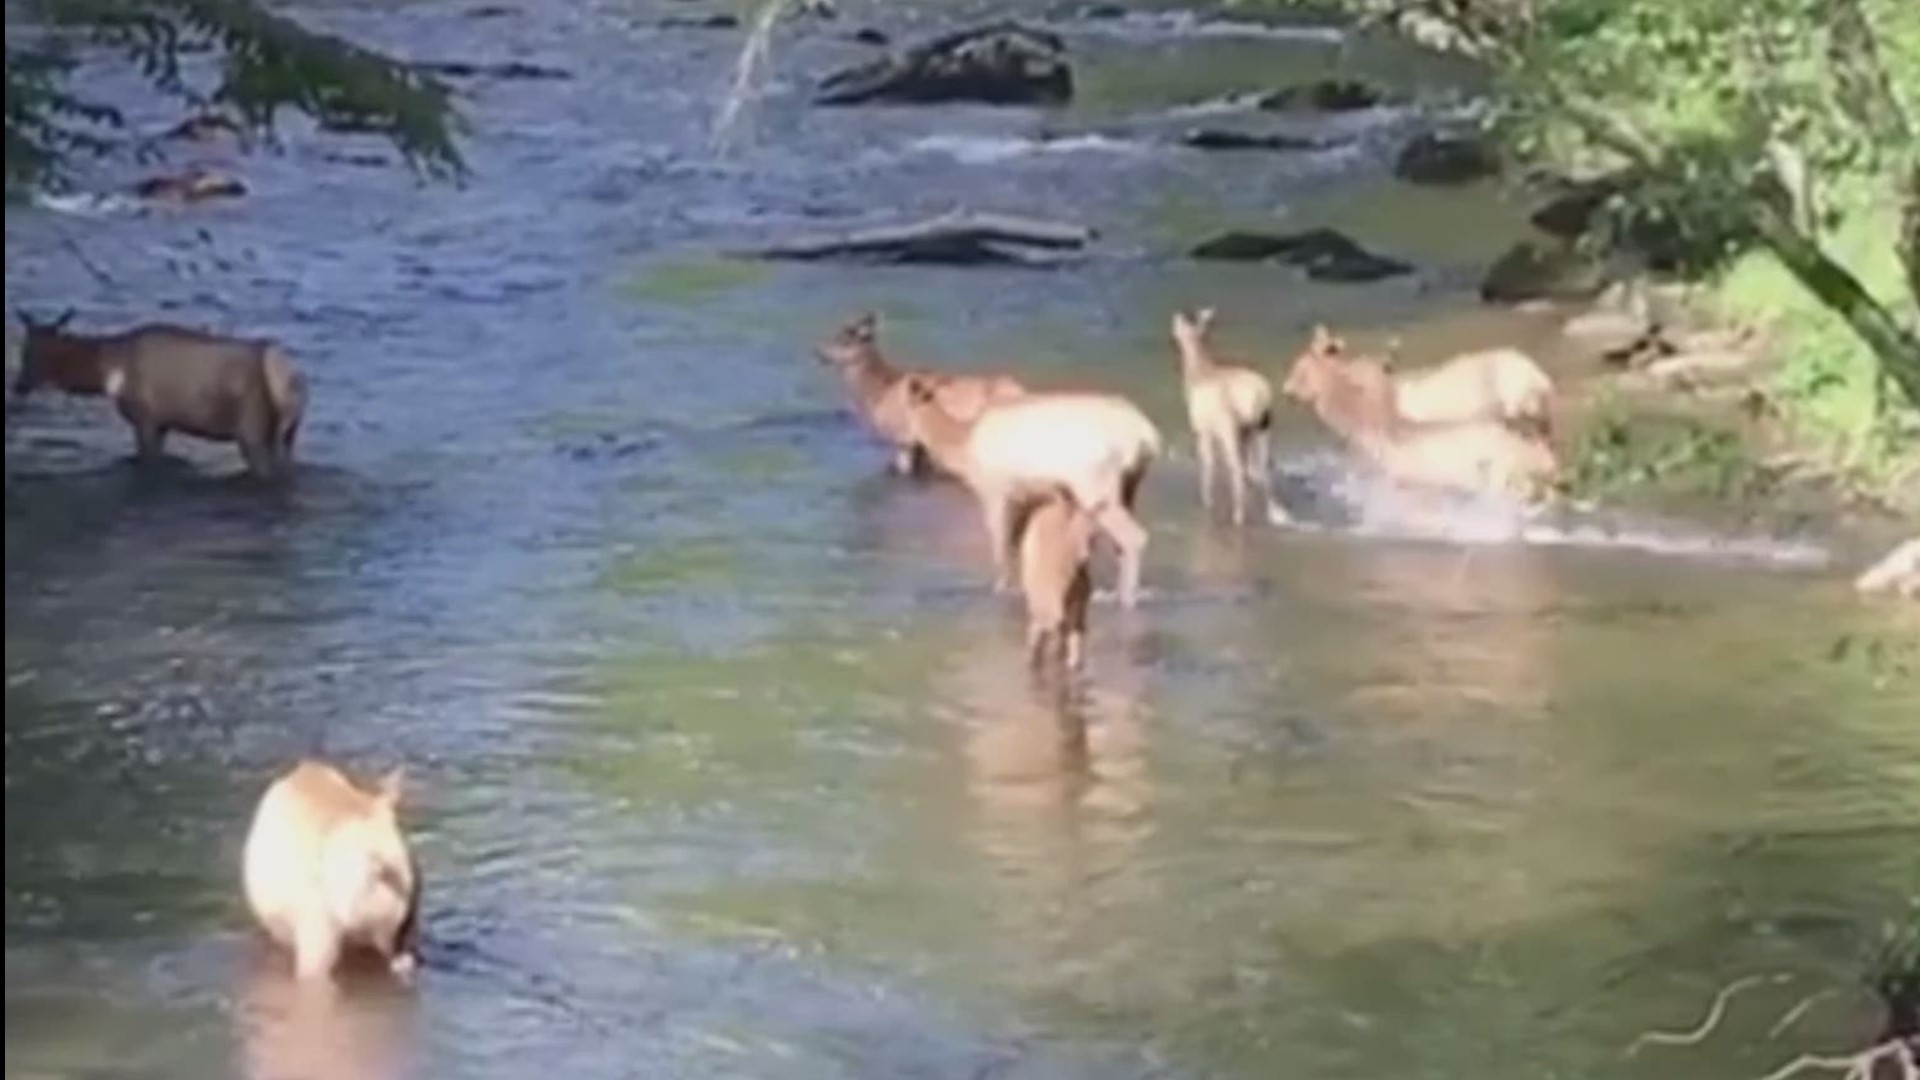 Elk video courtesy of Laurie Grace Wood